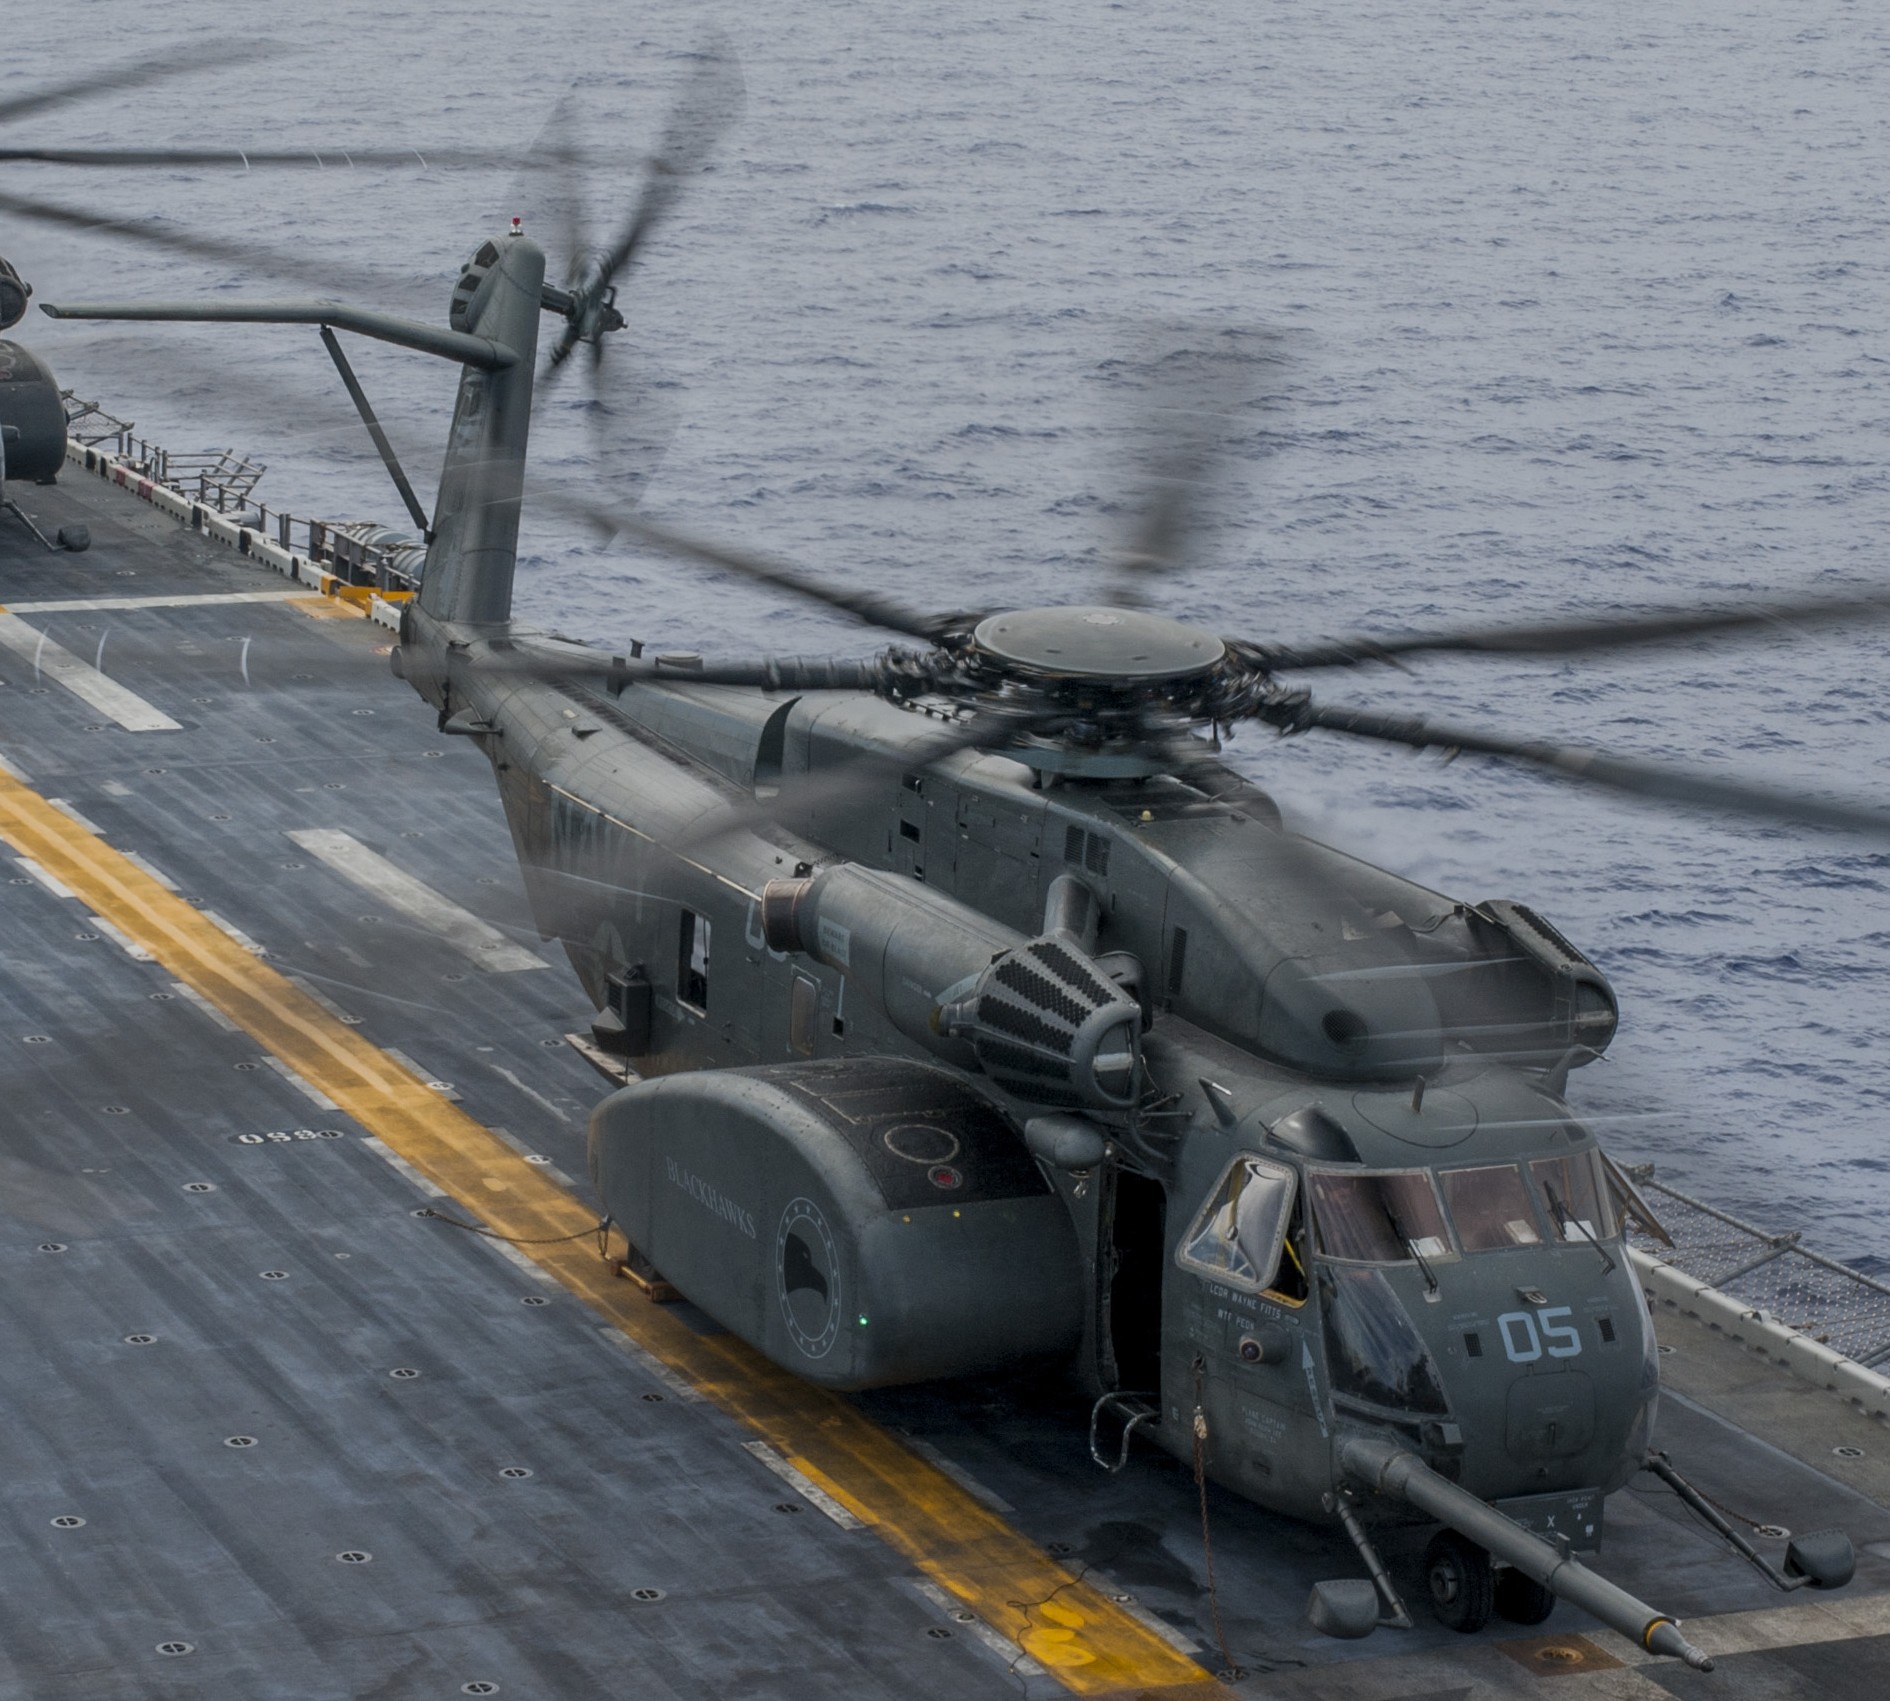 hm-15 blackhawks helicopter mine countermeasures squadron navy mh-53e sea dragon 14 uss wasp lhd-1